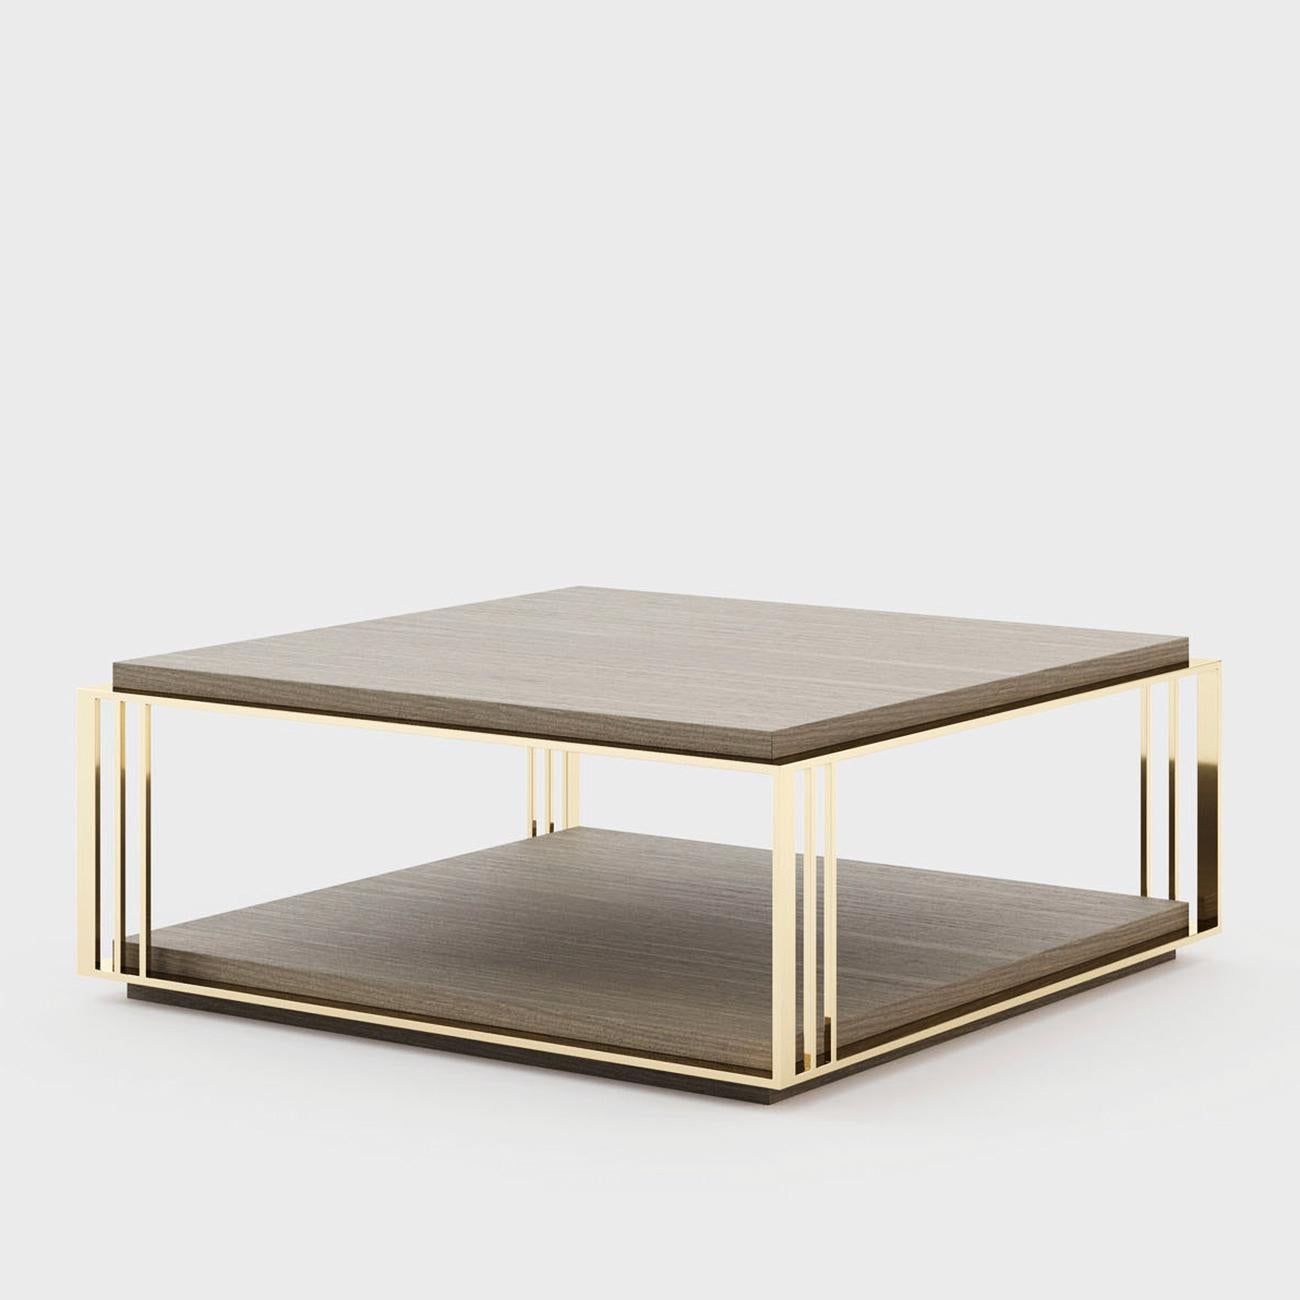 Coffee table Houston with polished stainless
steel structure in gold finish. With up and down
top in aged matte oak finish. 
Also available in other finishes on request.